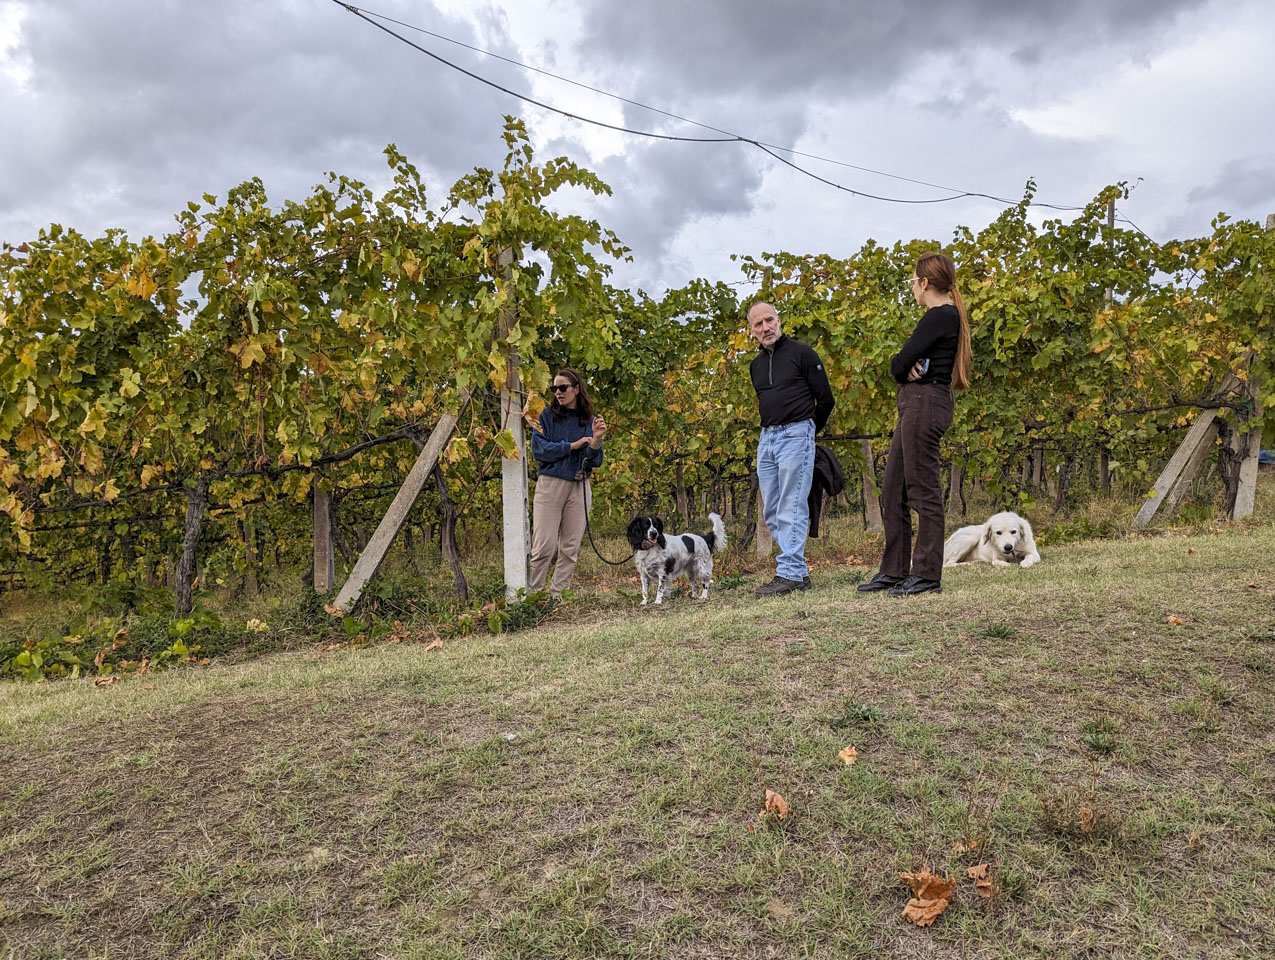 The tour guide Leonore, Paul, language instructor Agnese, and two dogs in a vineyard